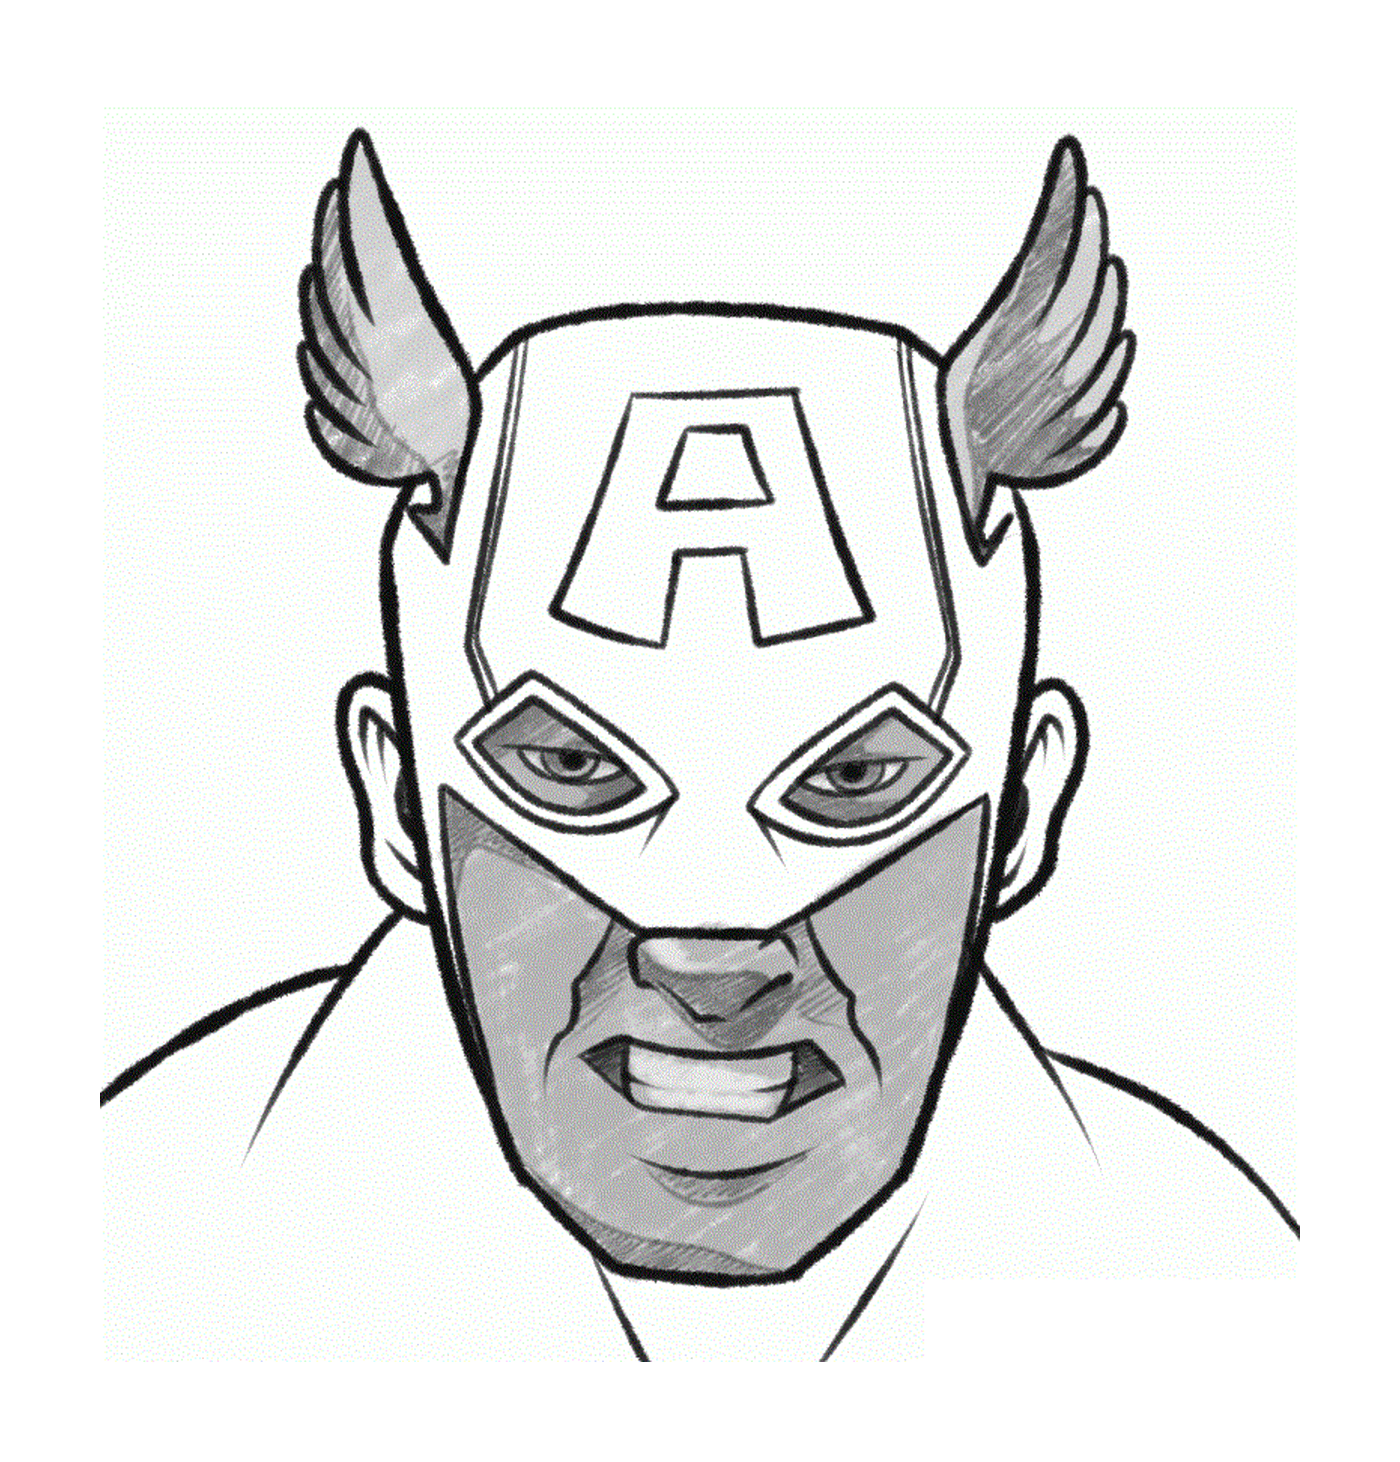  A man wearing a mask from Captain America 